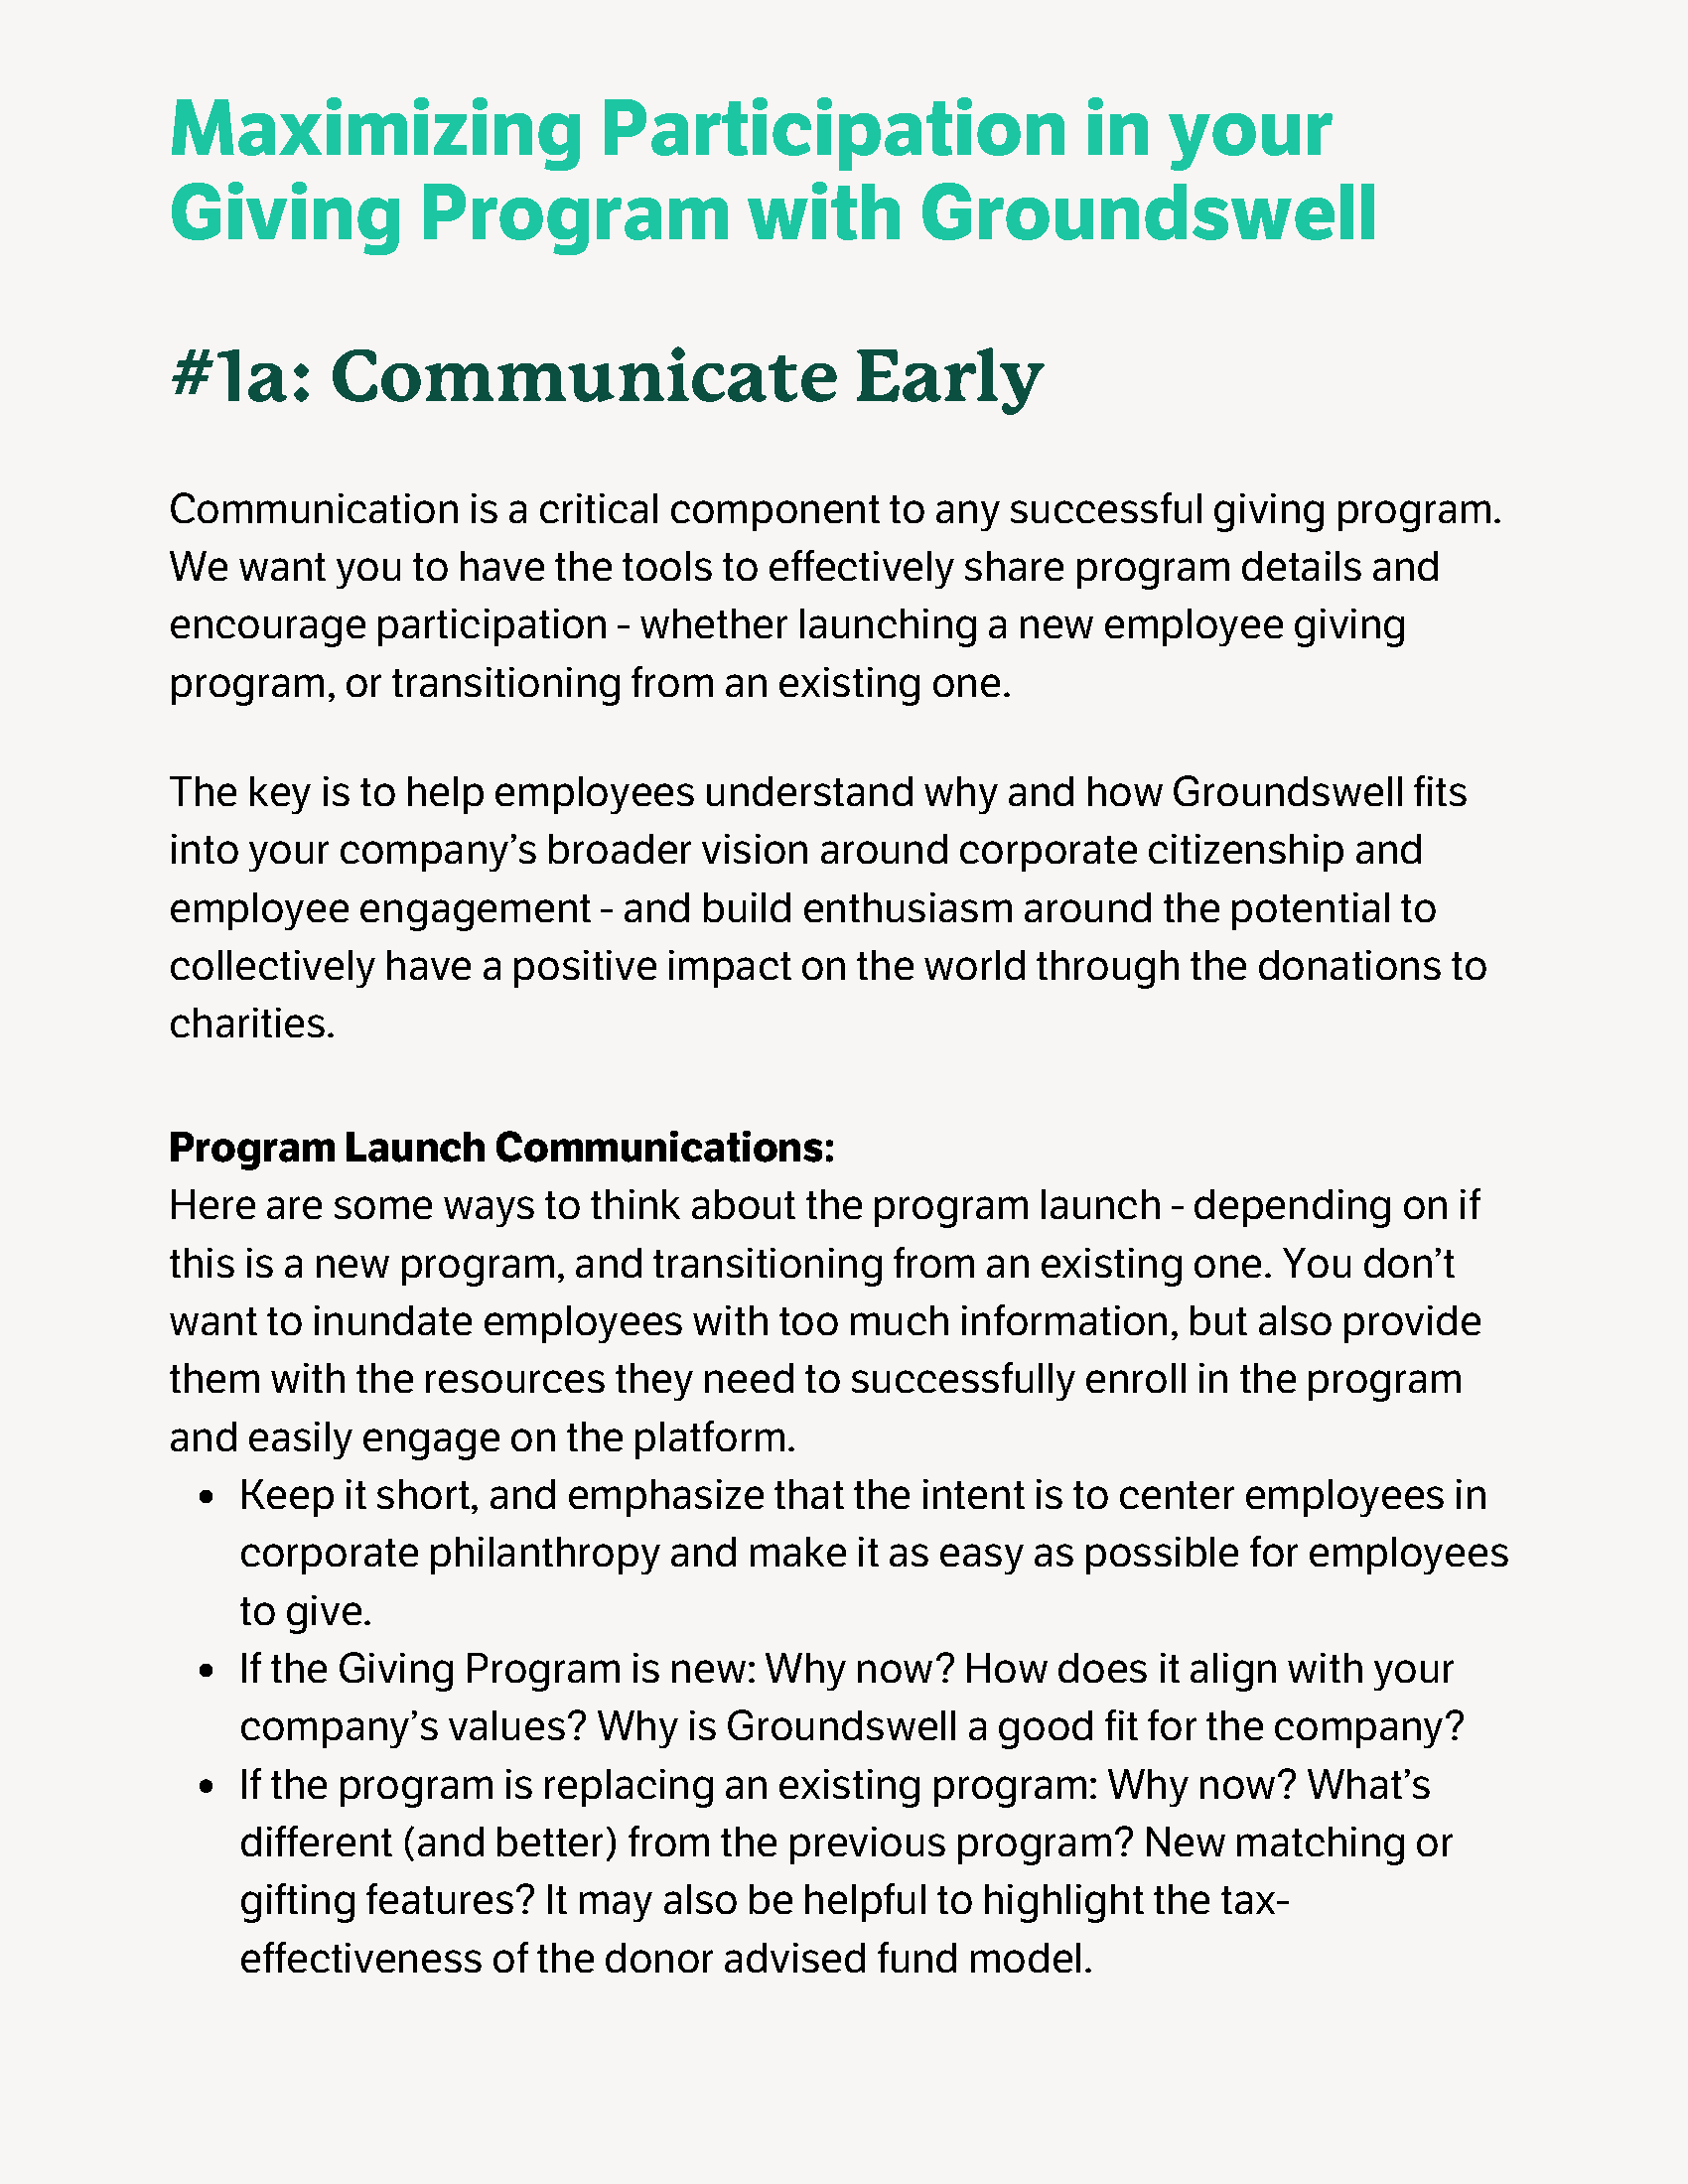 Employee Giving Program - Best Practices Guide_2023_Page_4.png